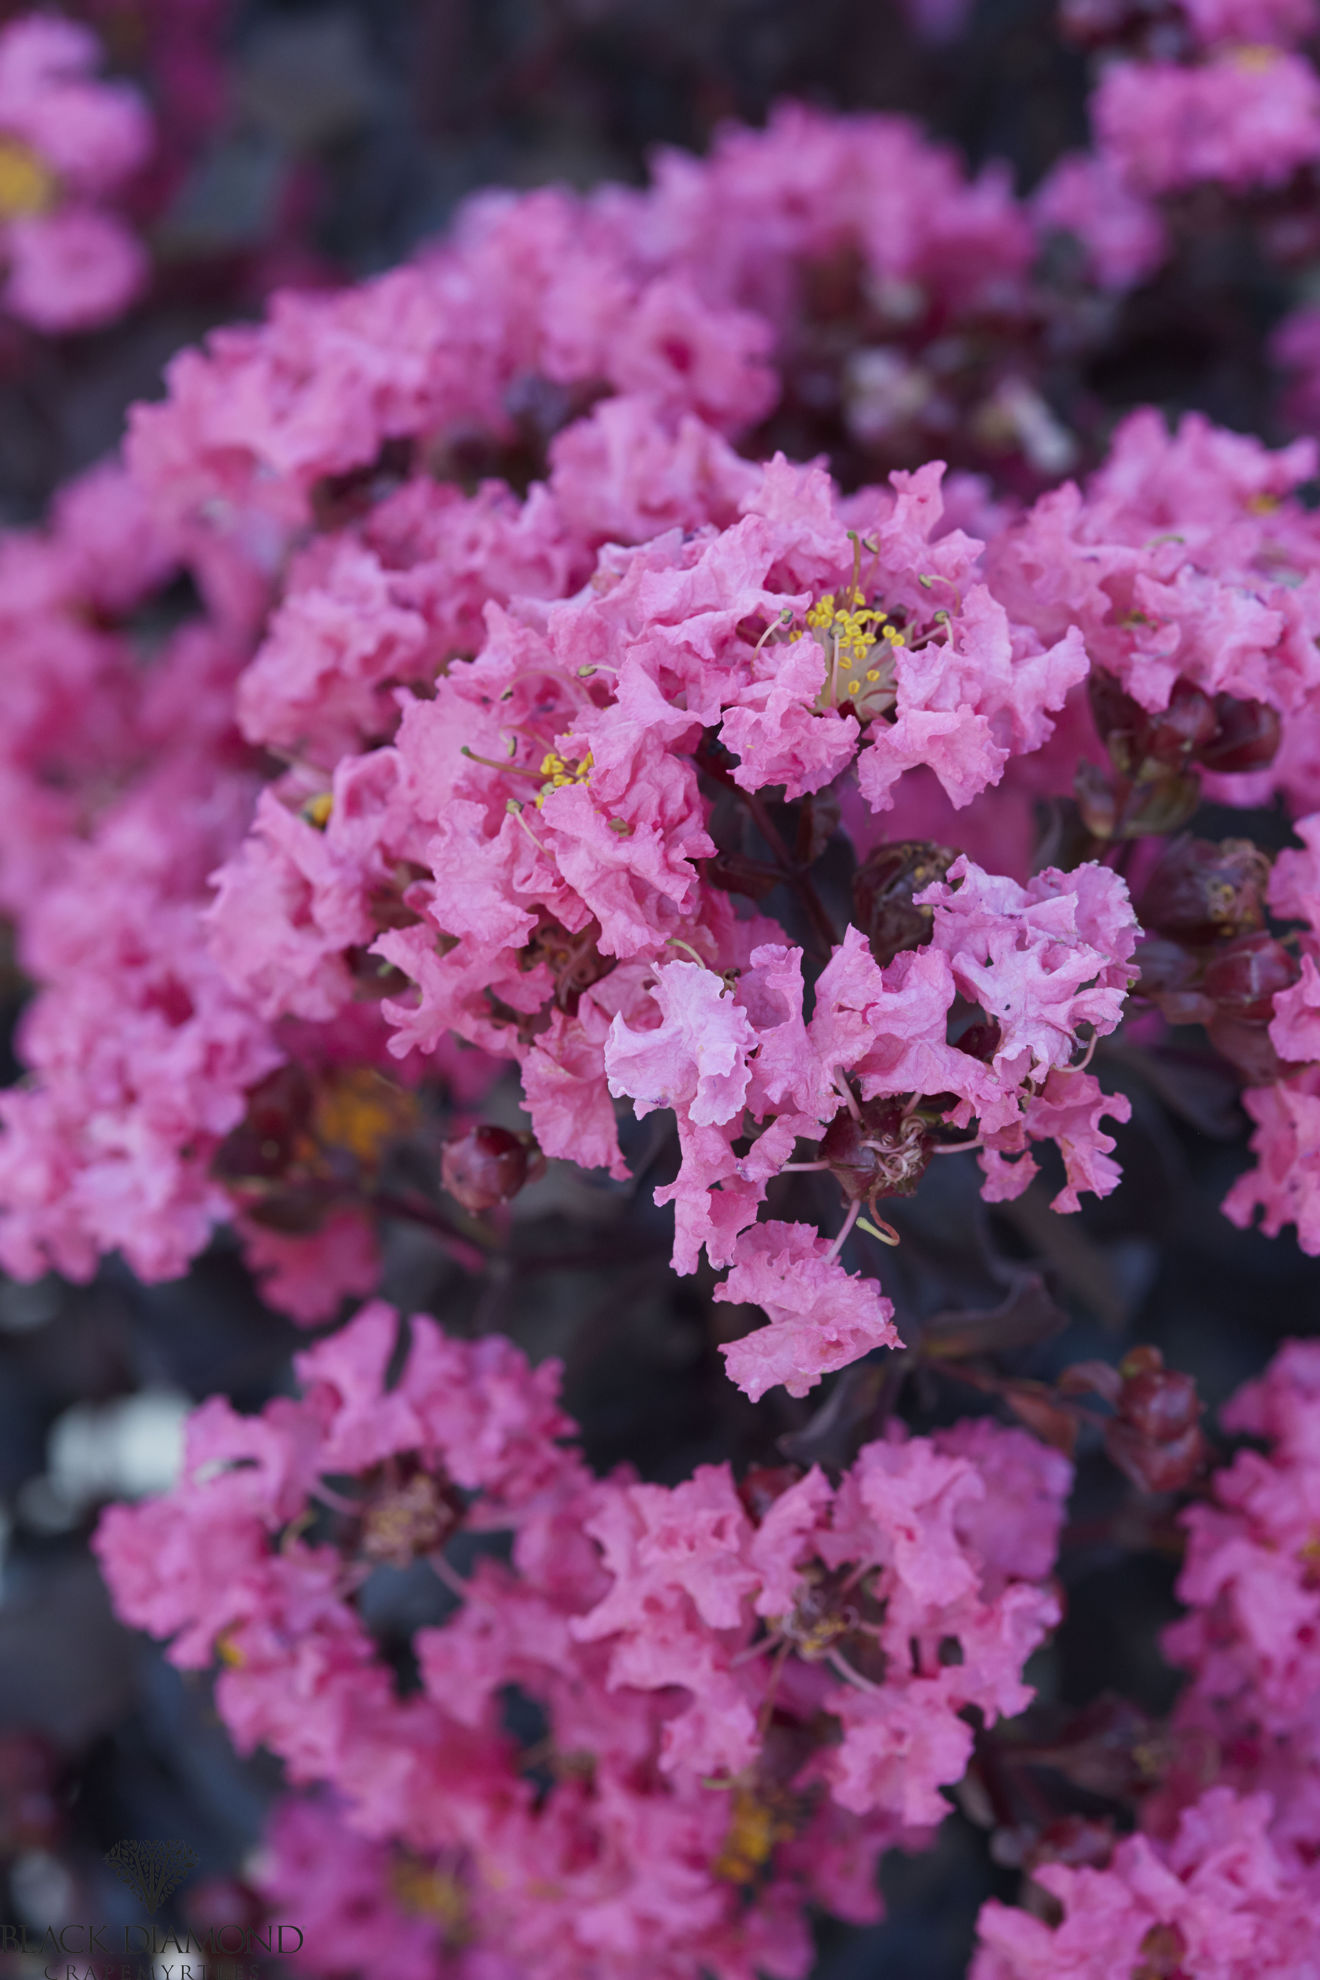 https://www.breederplants.nl/images/thumbs/0002030_Lagerstroemia 'Shell Pink'.jpeg